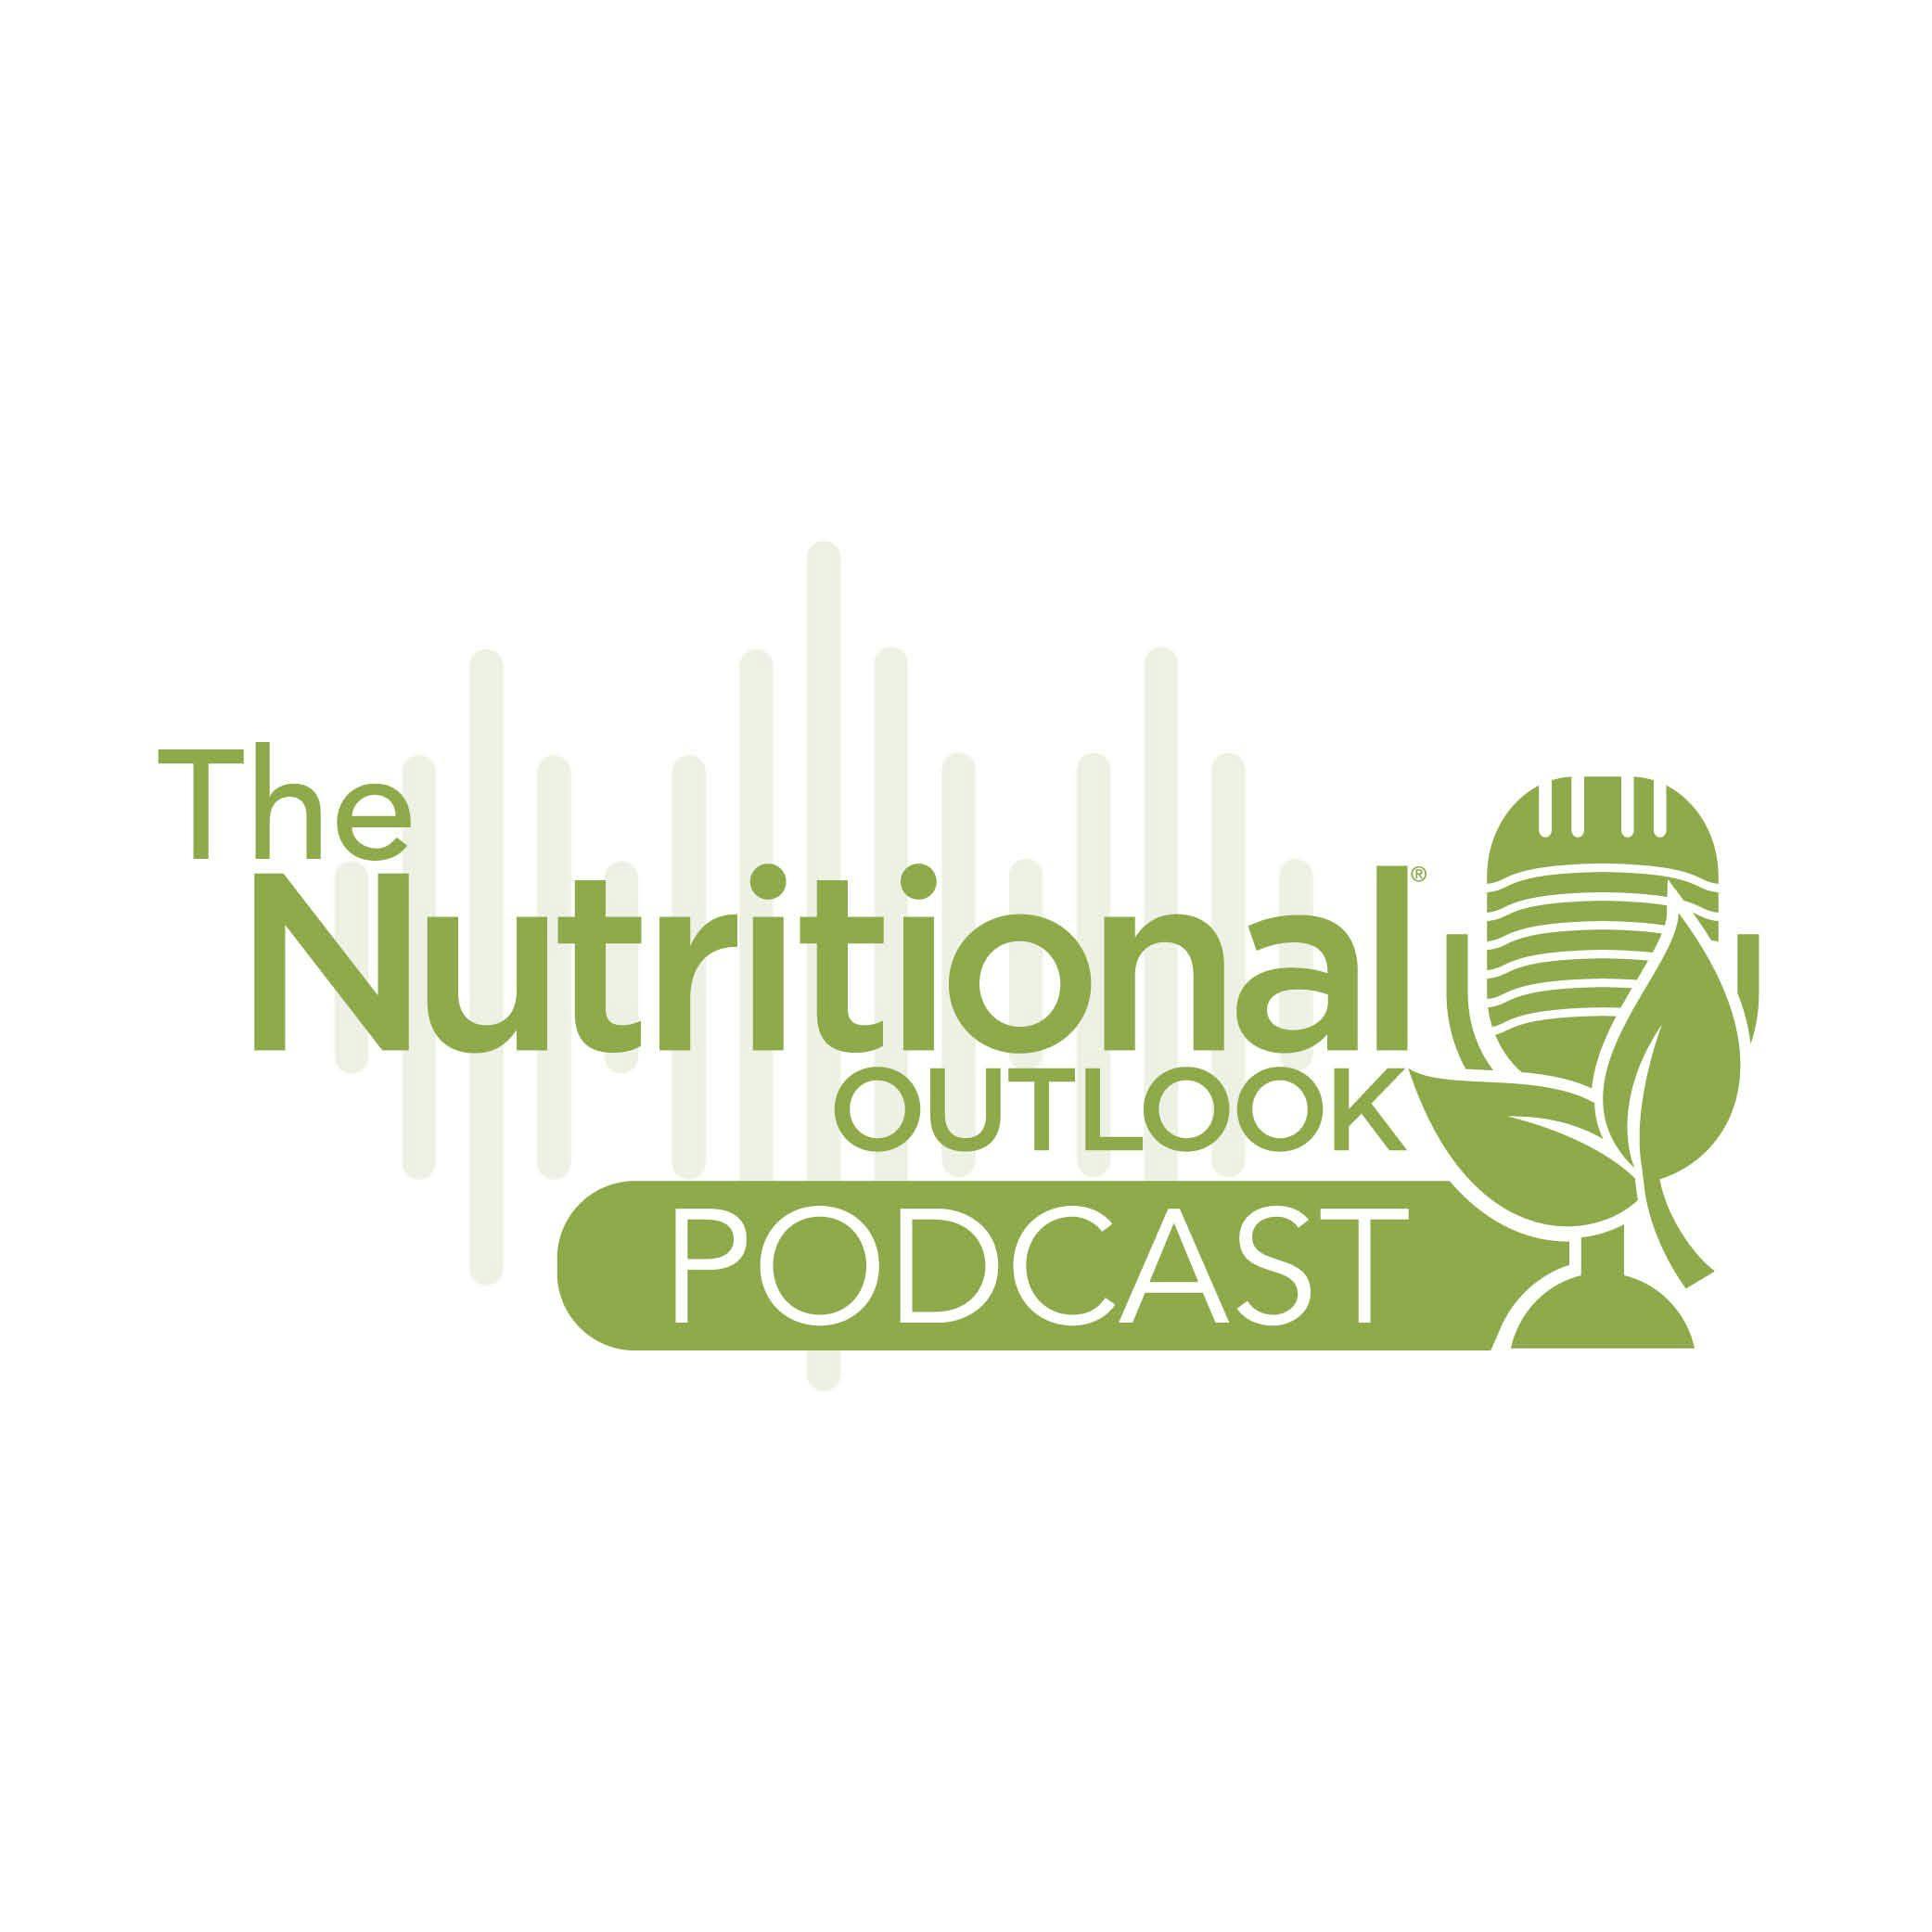 Episode 4: "Will consumers stop buying dietary supplements once the pandemic improves?